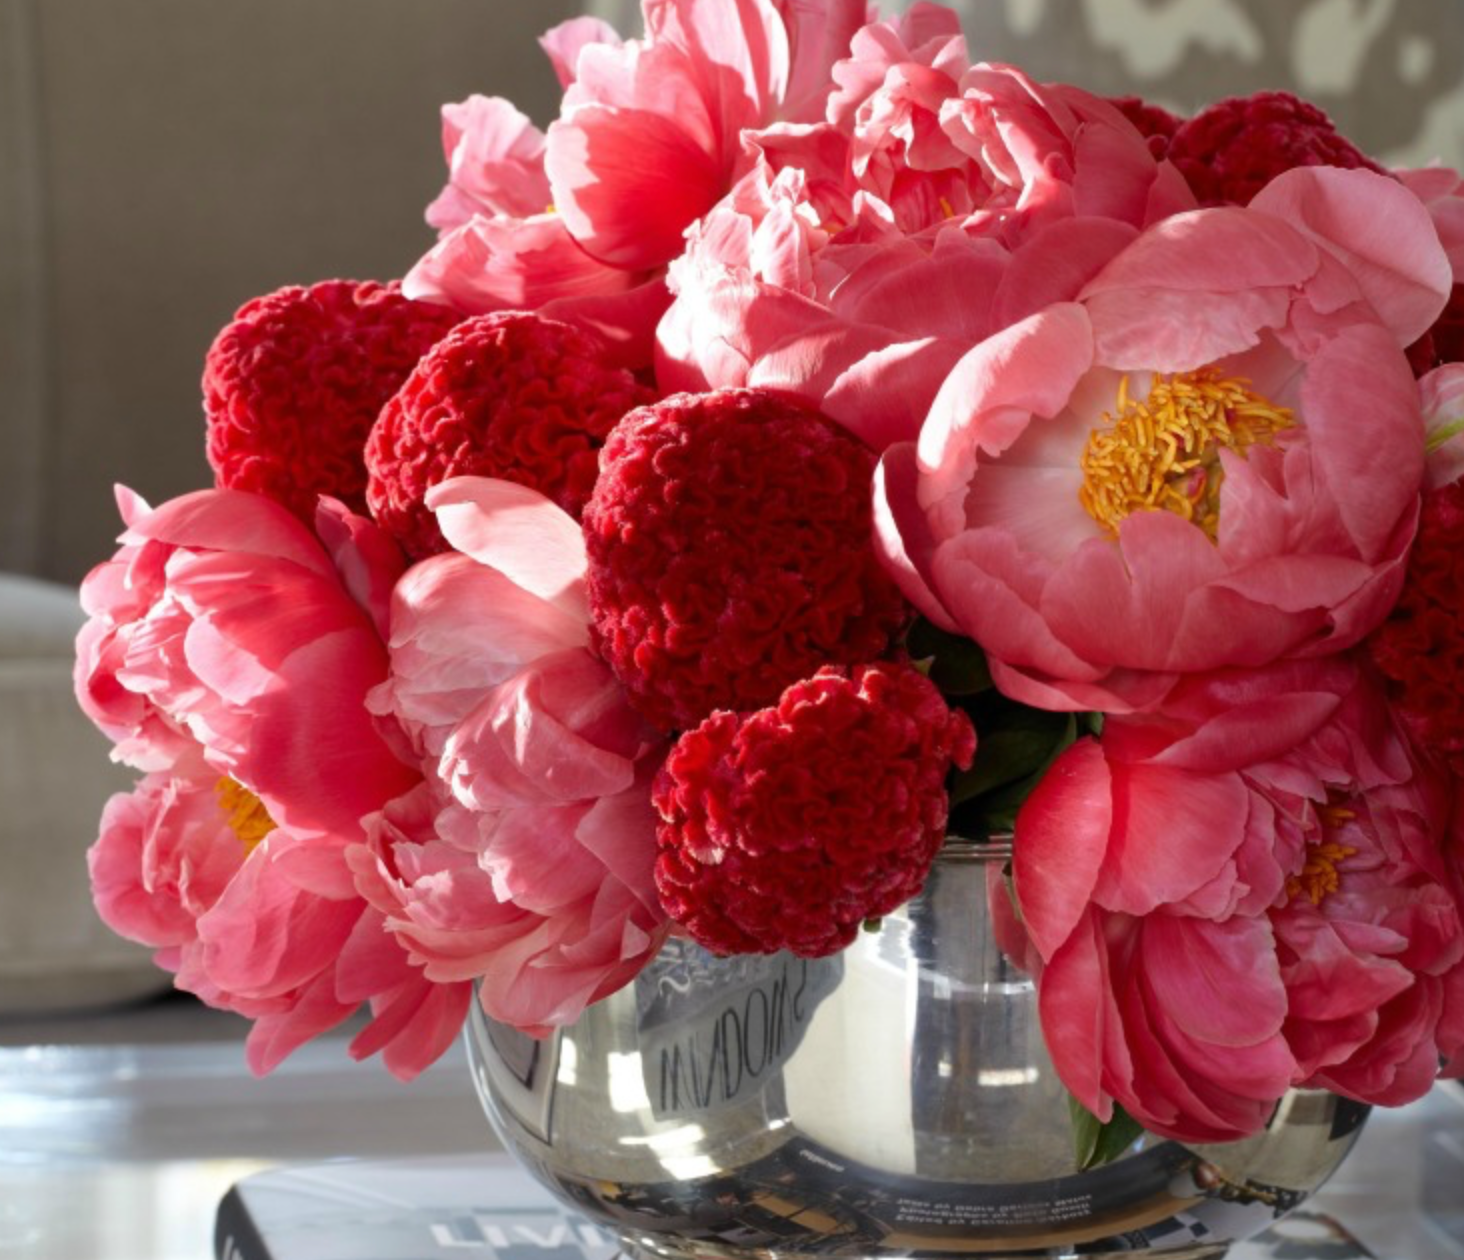 It’s just not the South if there aren’t peonies….(<a href="http://www.samalleninteriors.com/" target="_blank">Sam Allen Interiors</a>.)